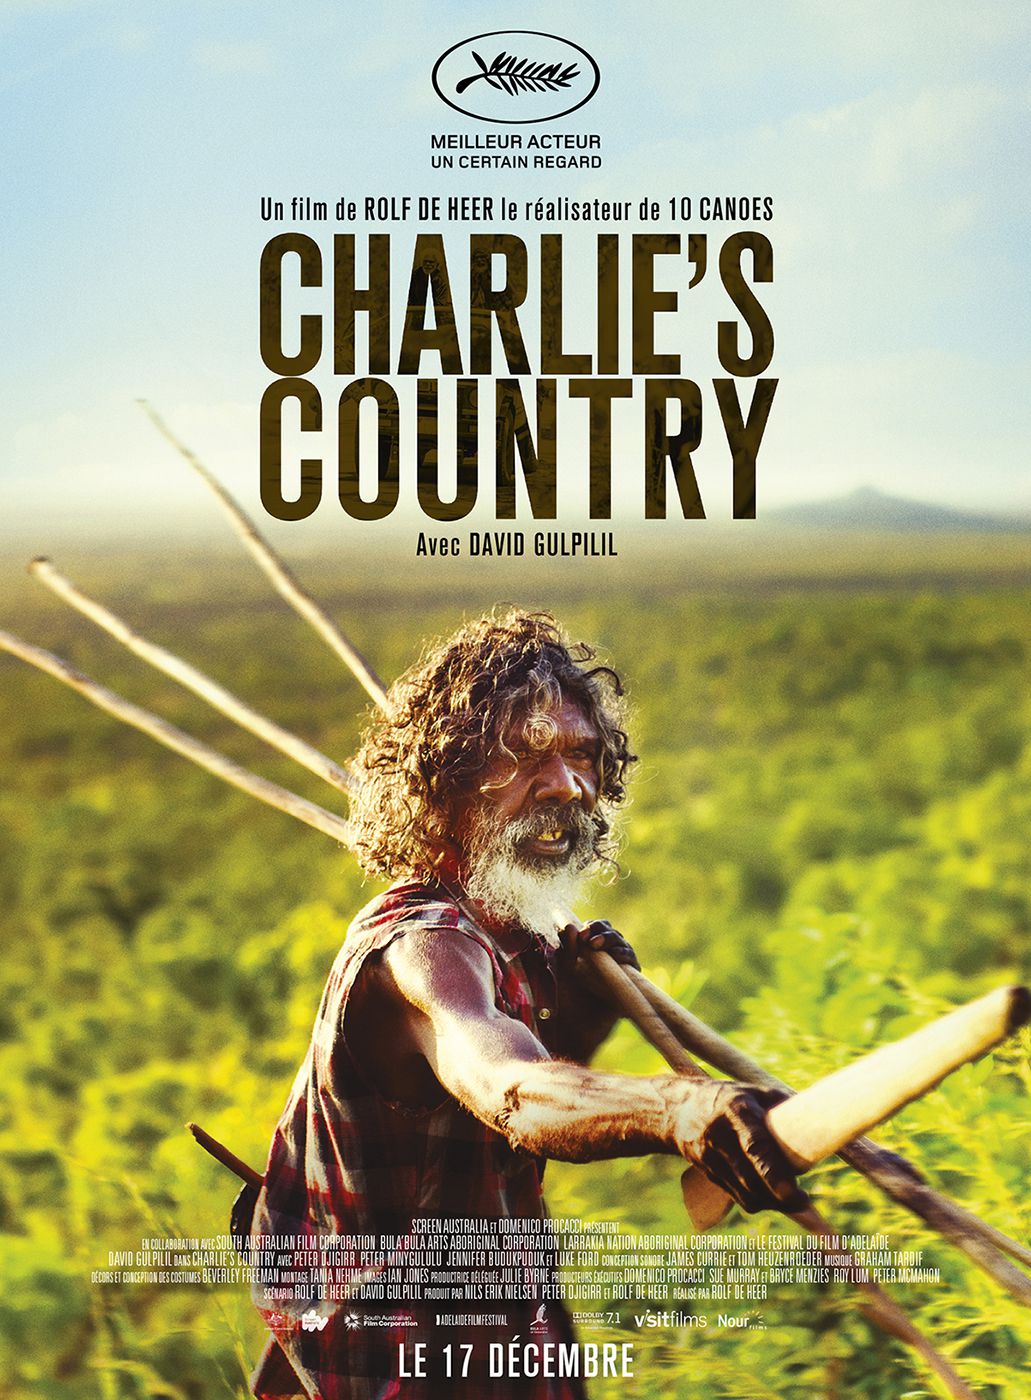 Charlie’s Country - Film (2014) streaming VF gratuit complet